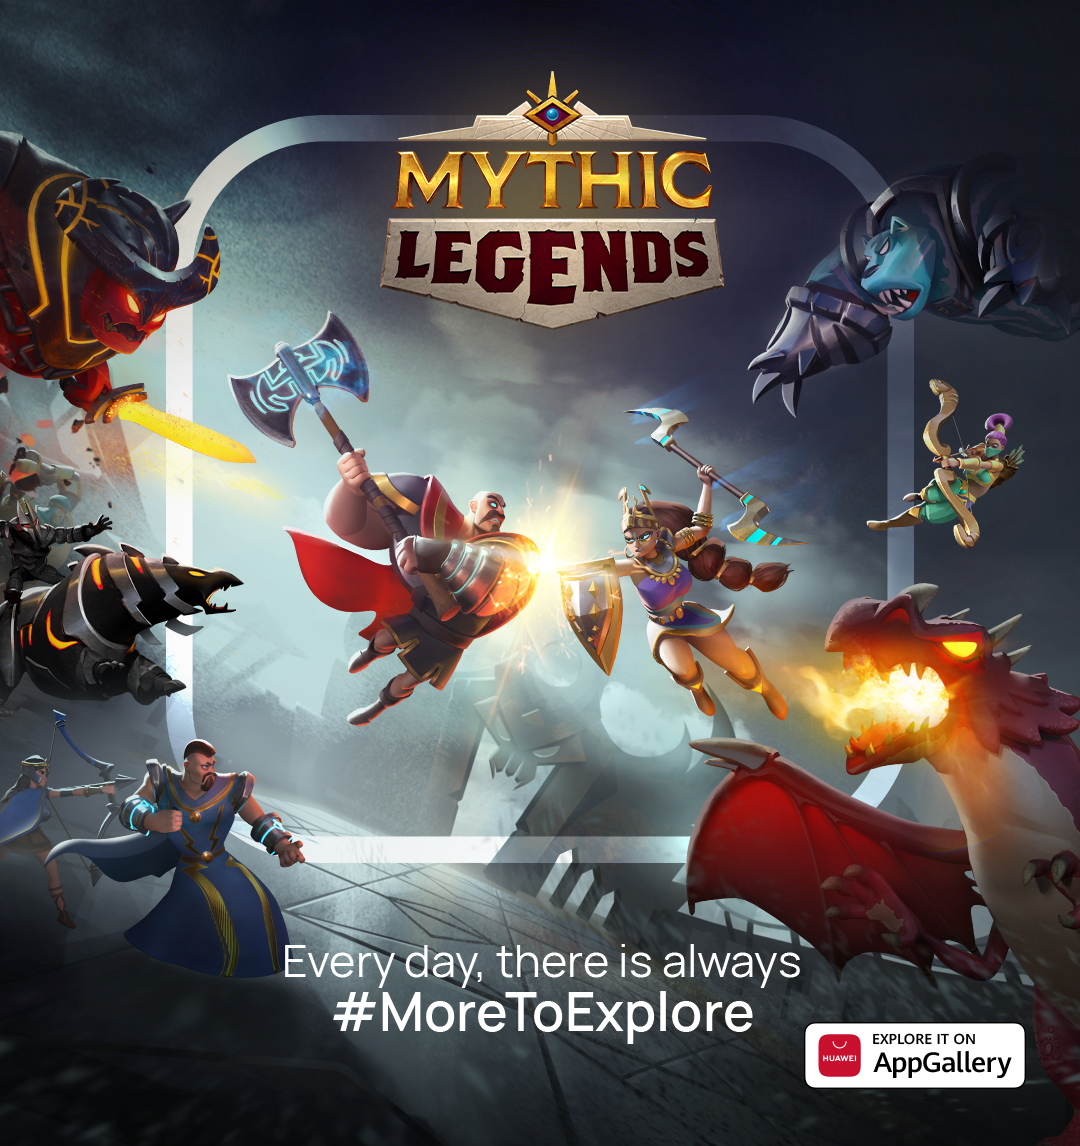 Mythic Legends x AppGallery